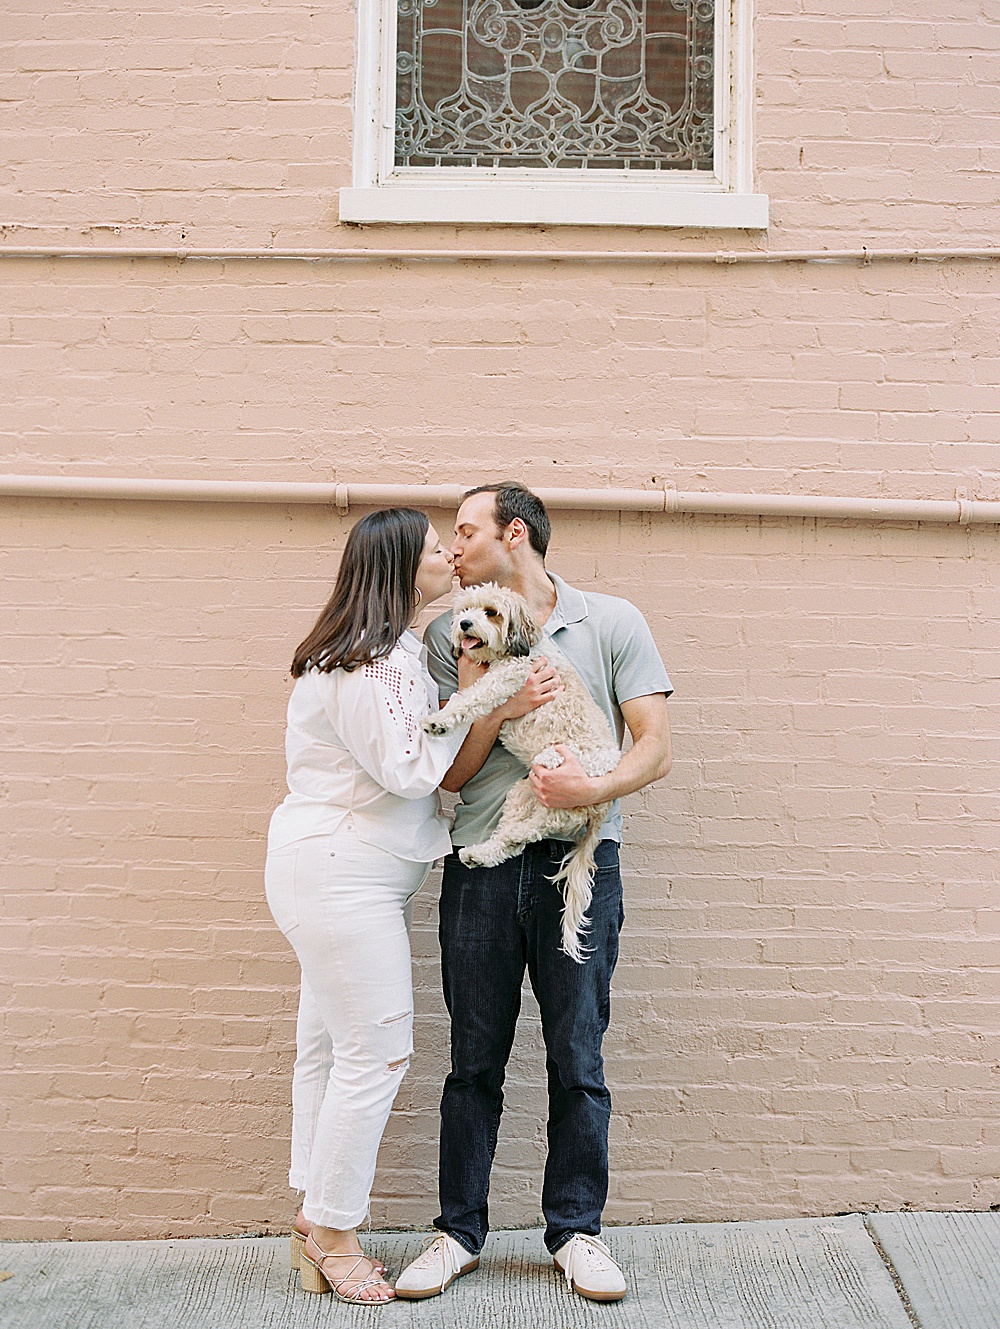 Summer DC Engagement Session in Washington DC with puppy